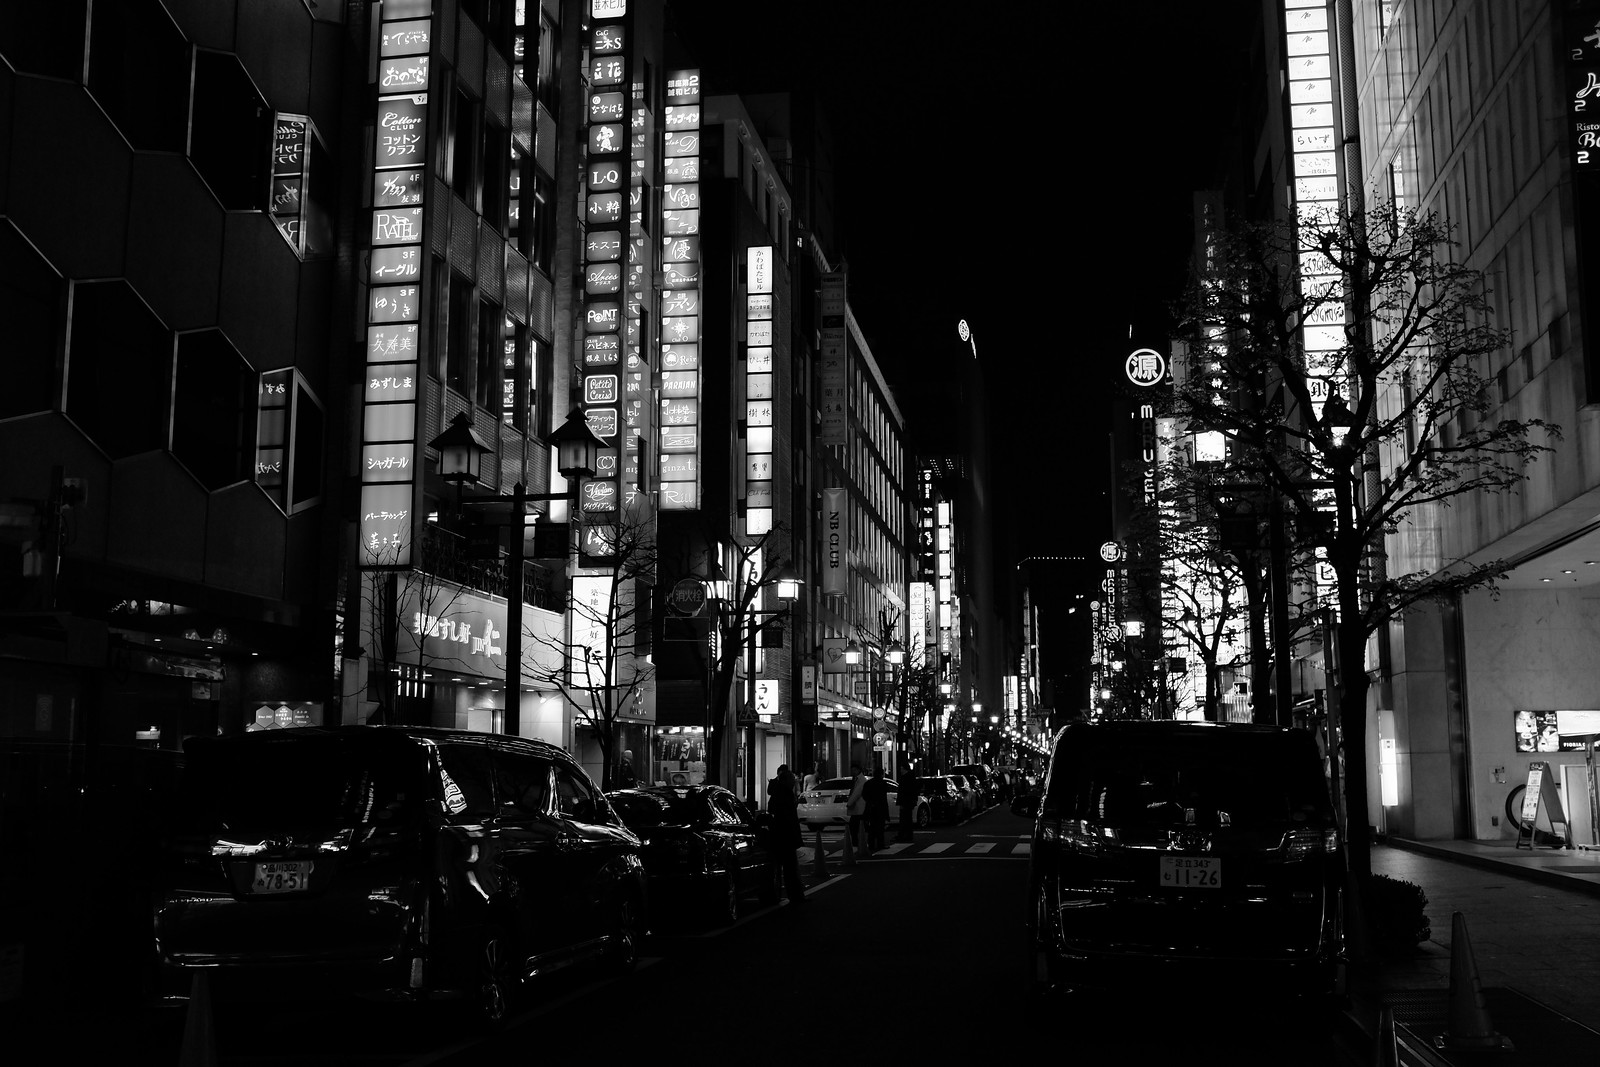 The Ginza Night of Tokyo, Japan.